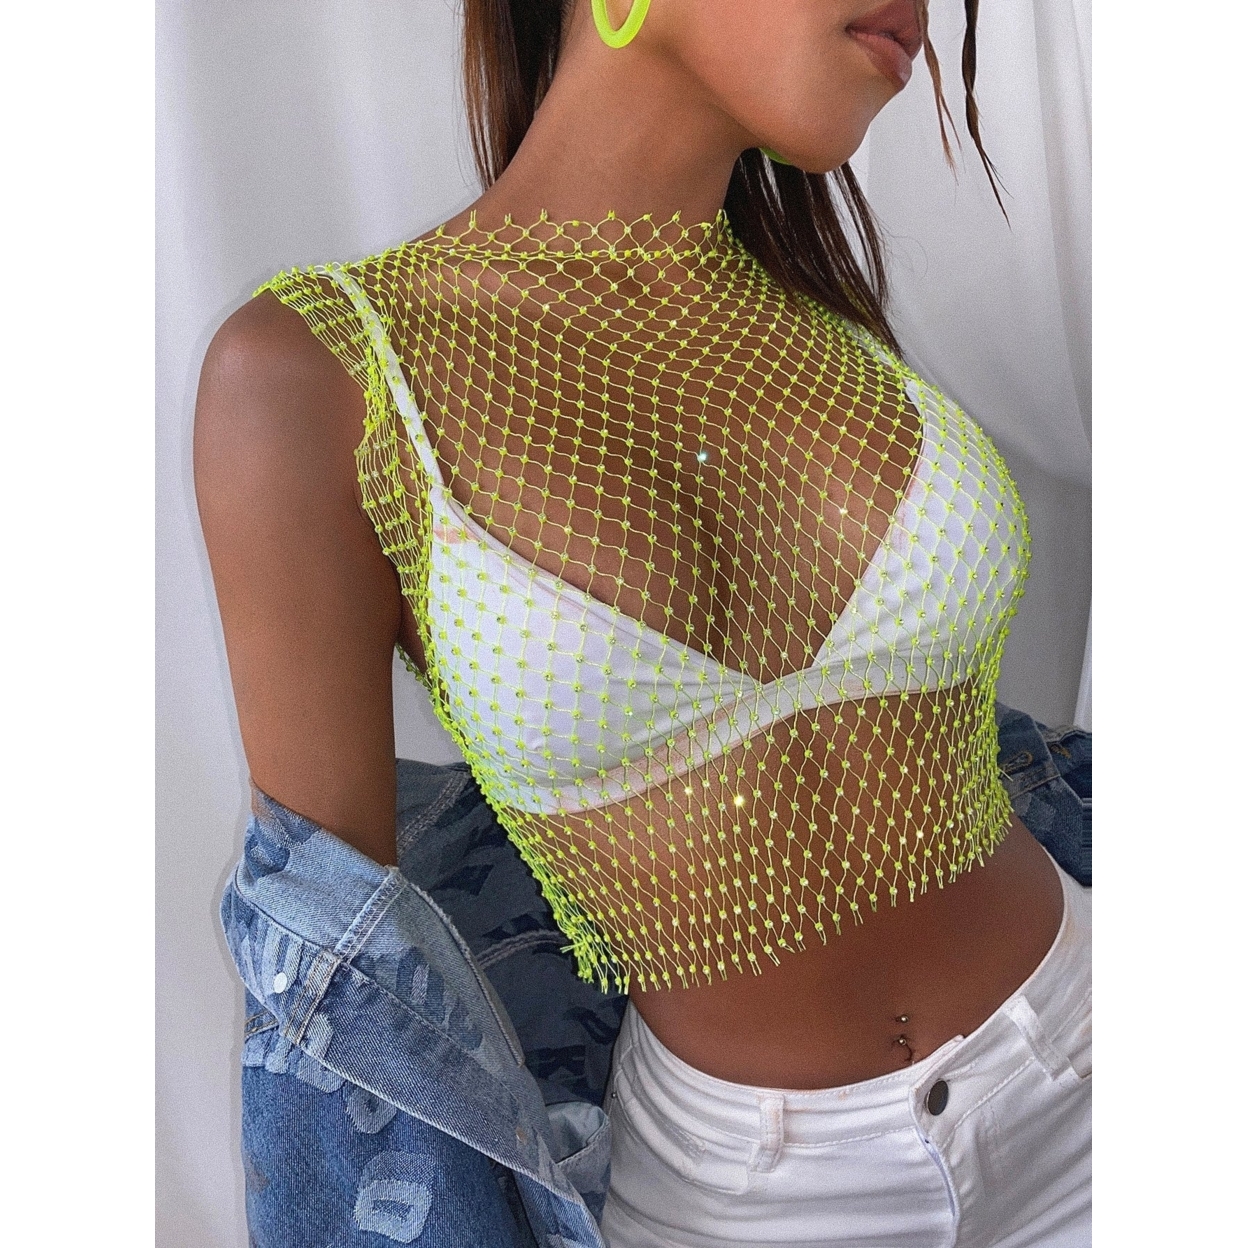 Rhinestone Detail Fishnet Top Without Bra - Lime Green, S